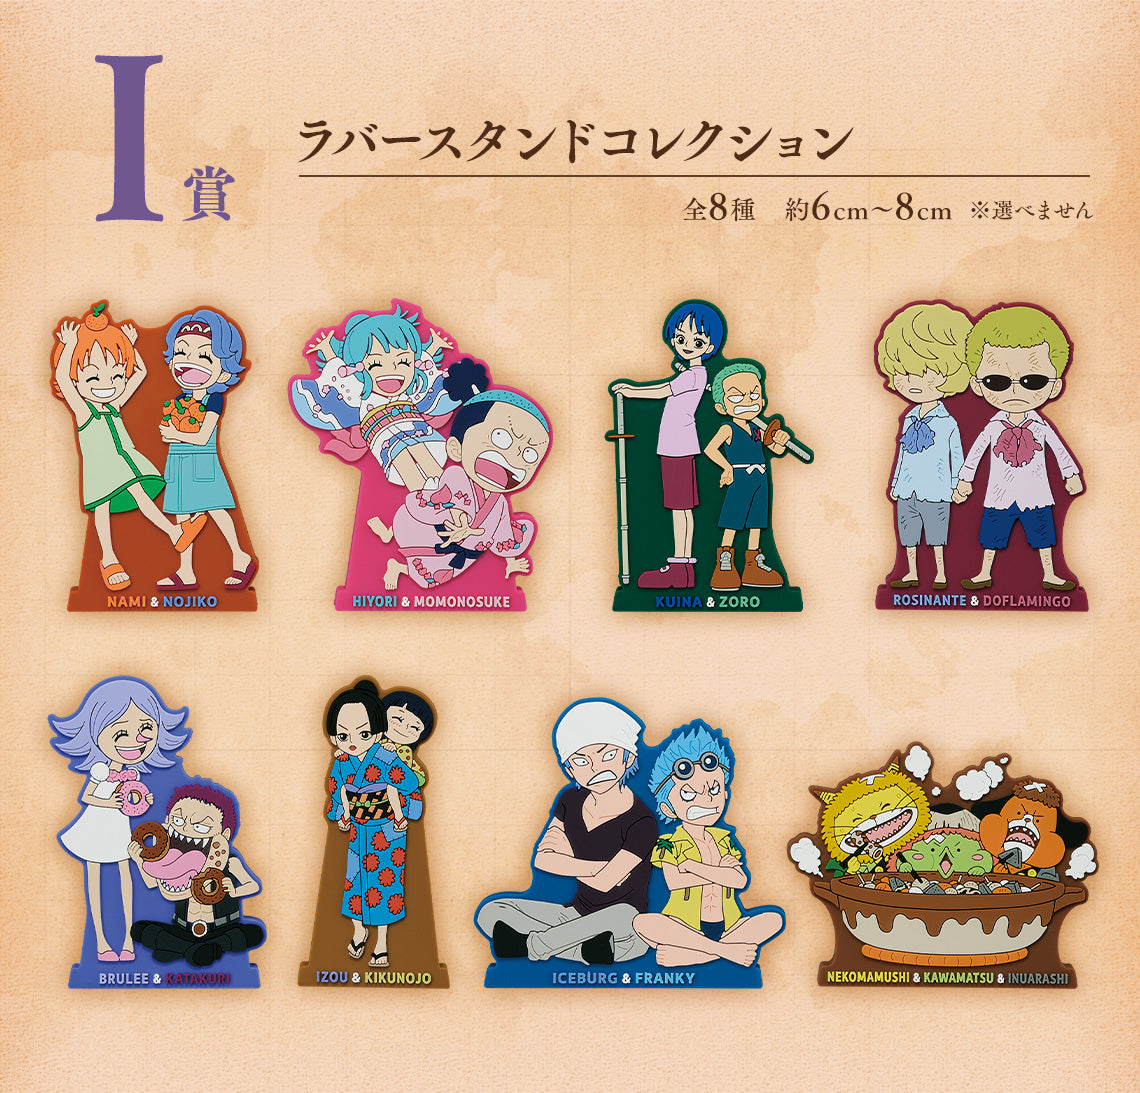 ONE PIECE ICHIBAN KUJI EMOTIONAL STORIES 2 PRIZE I REVIBLE MOMENT - RUBBER STAND COLLECTION FULL SET 8 Pcs